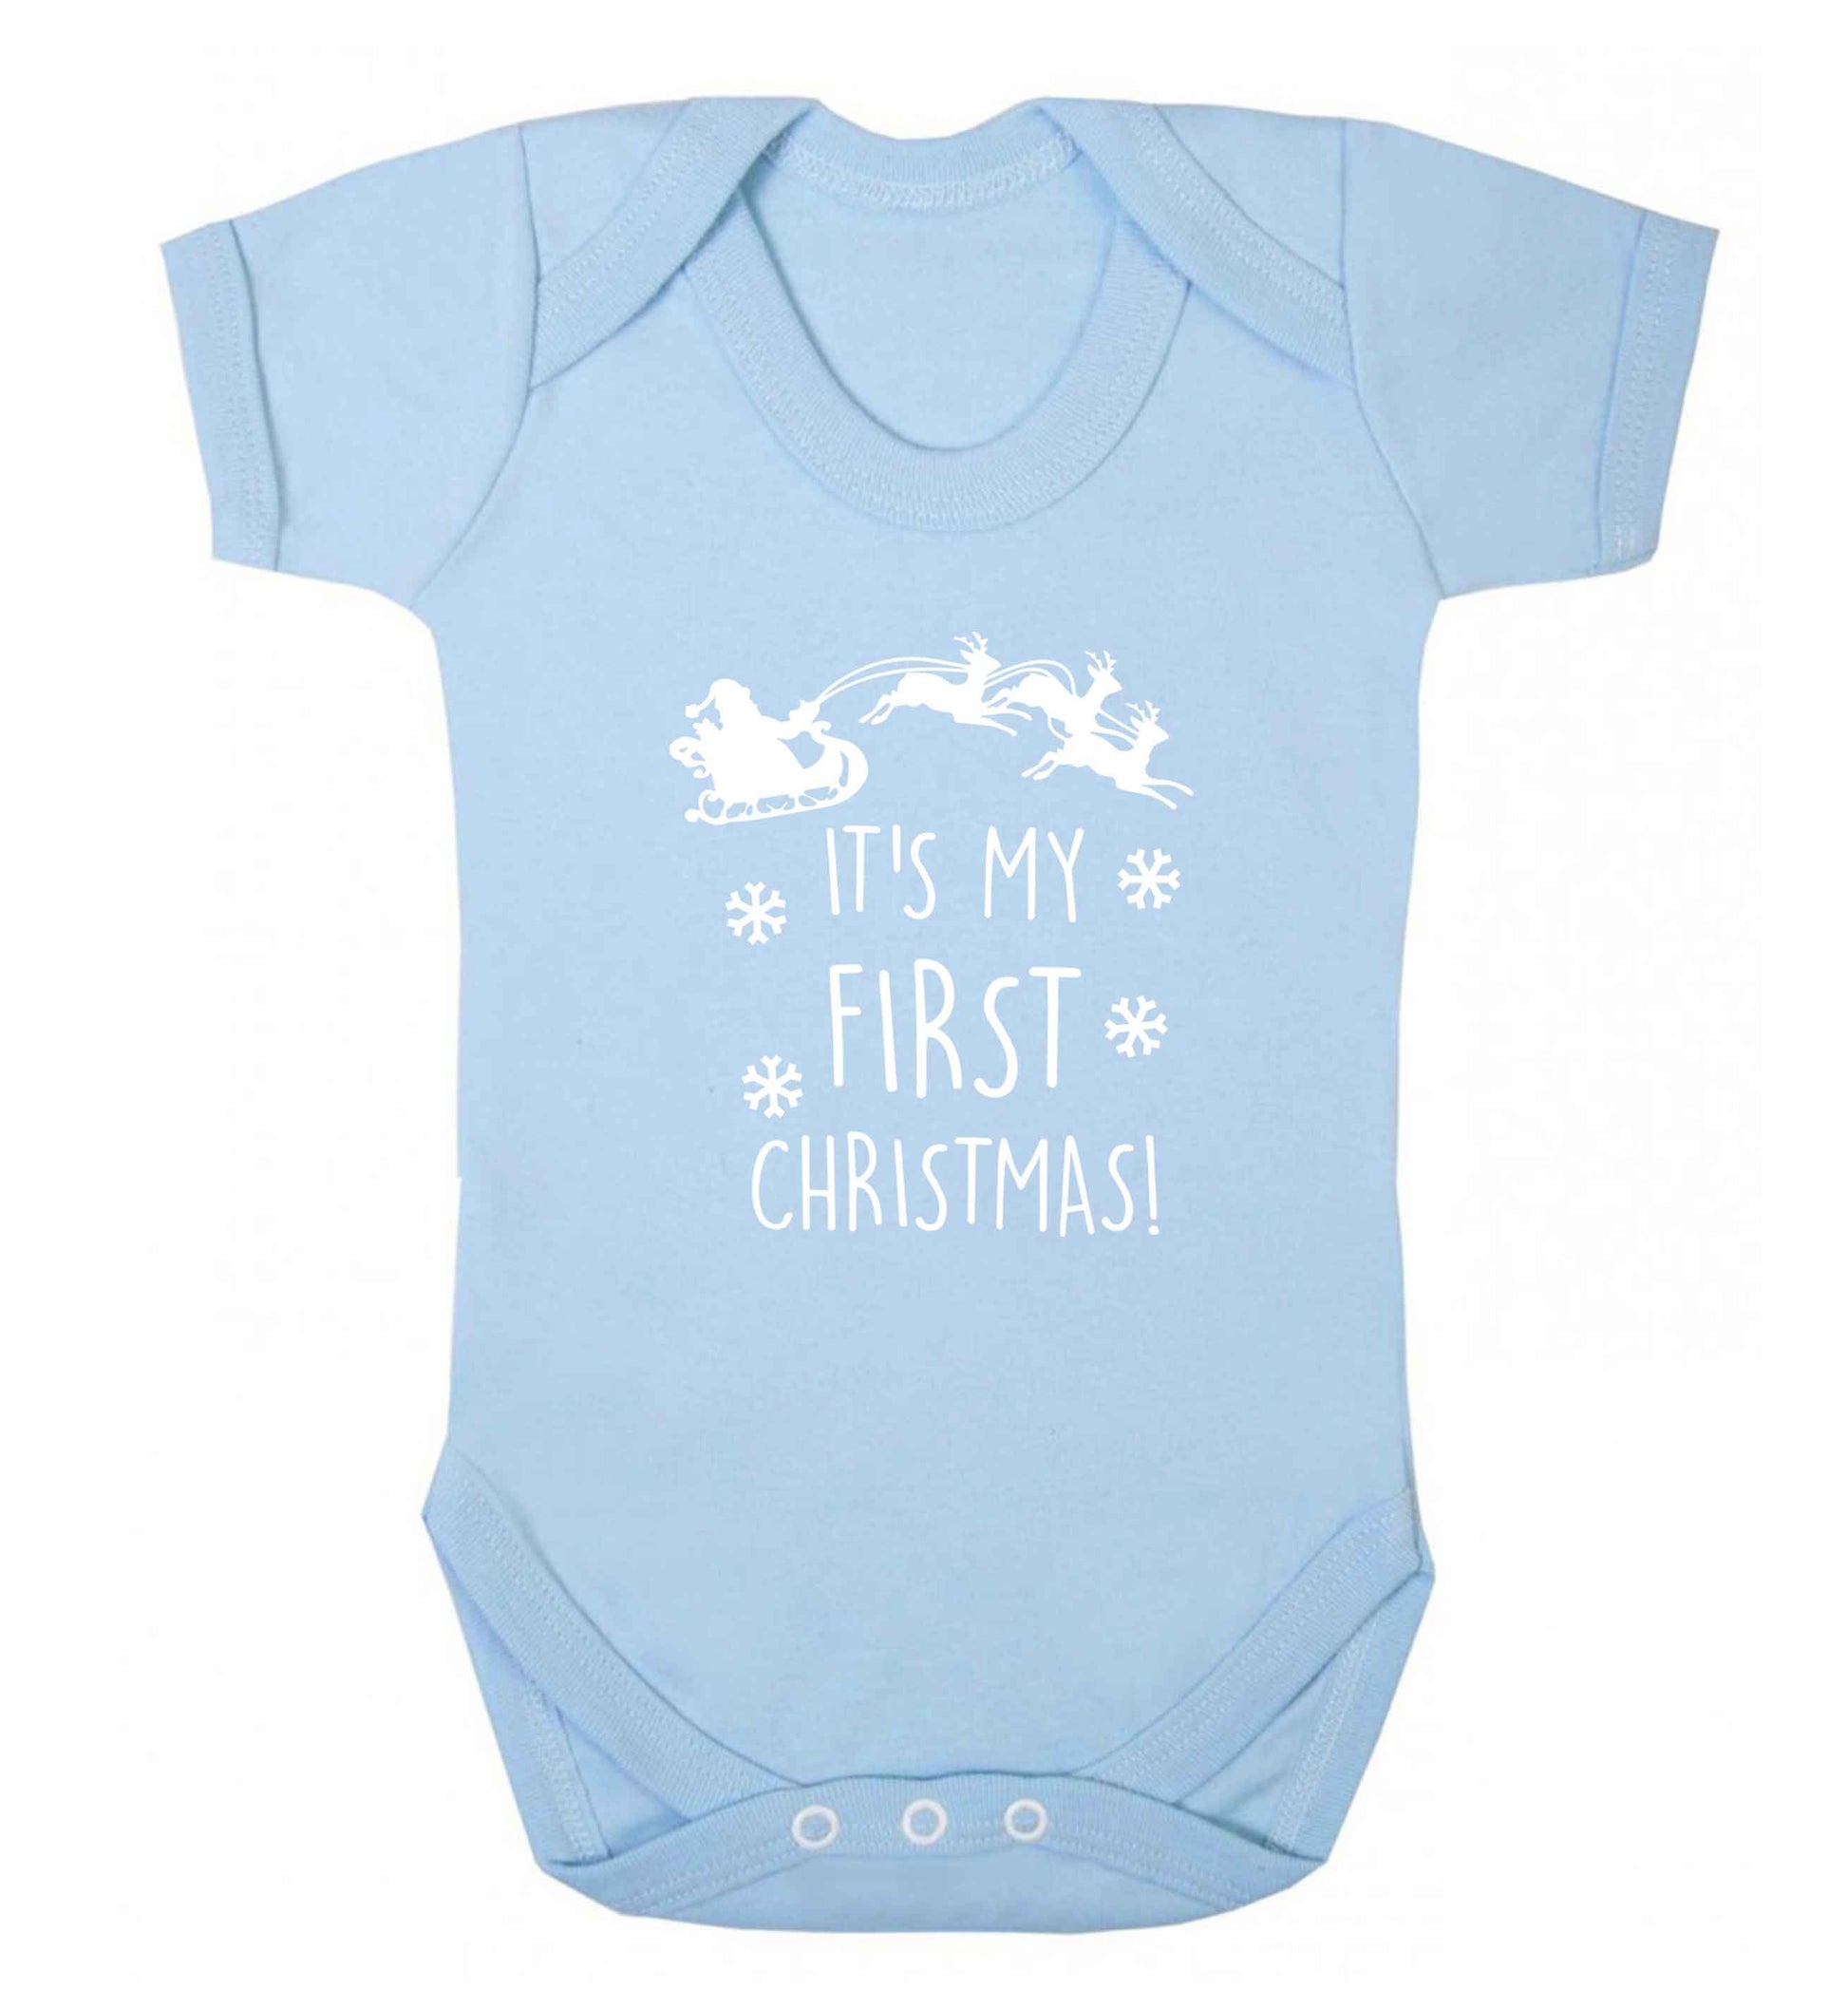 It's my first Christmas - Santa sleigh text baby vest pale blue 18-24 months